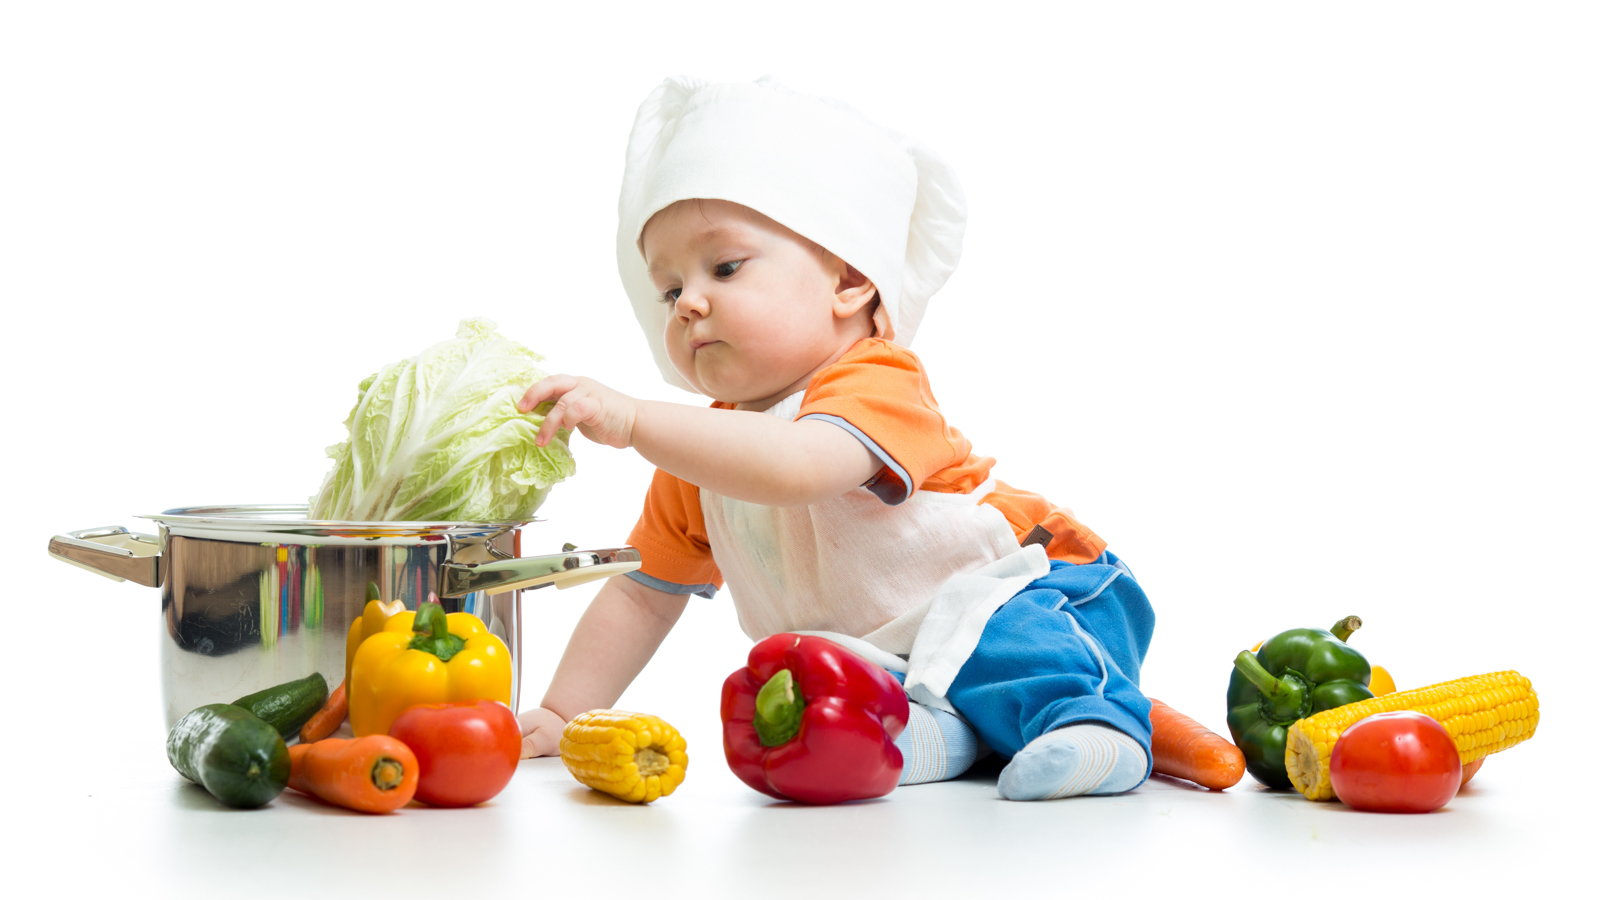 baby wearing chef's hat putting vegetables in pot